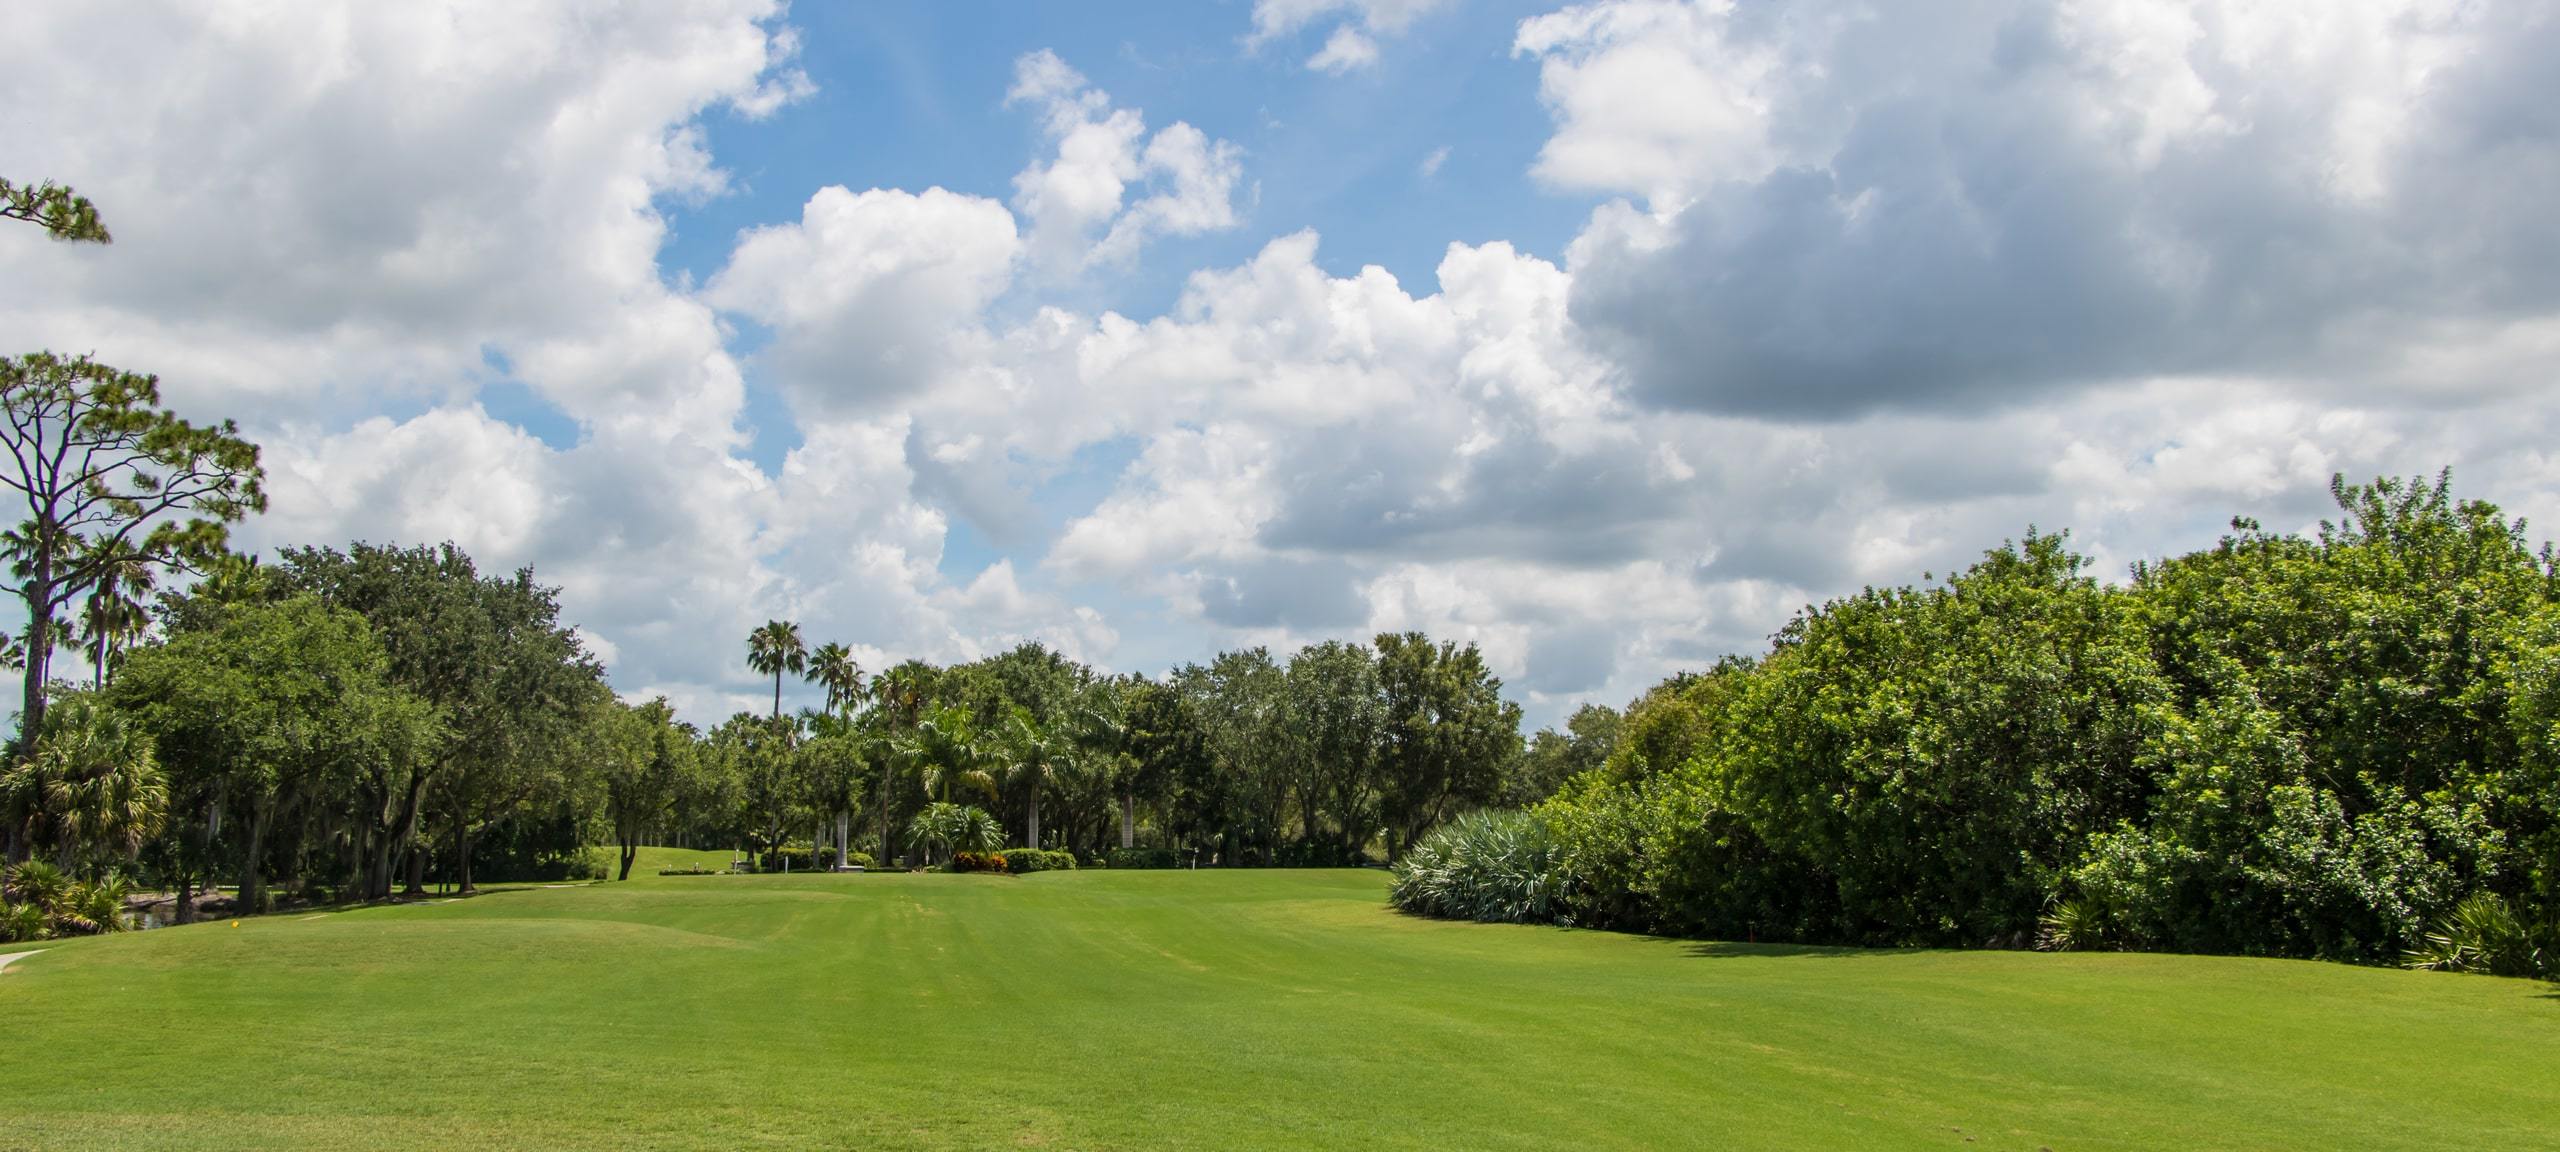 Mix of sun and clouds over Florida area golf course